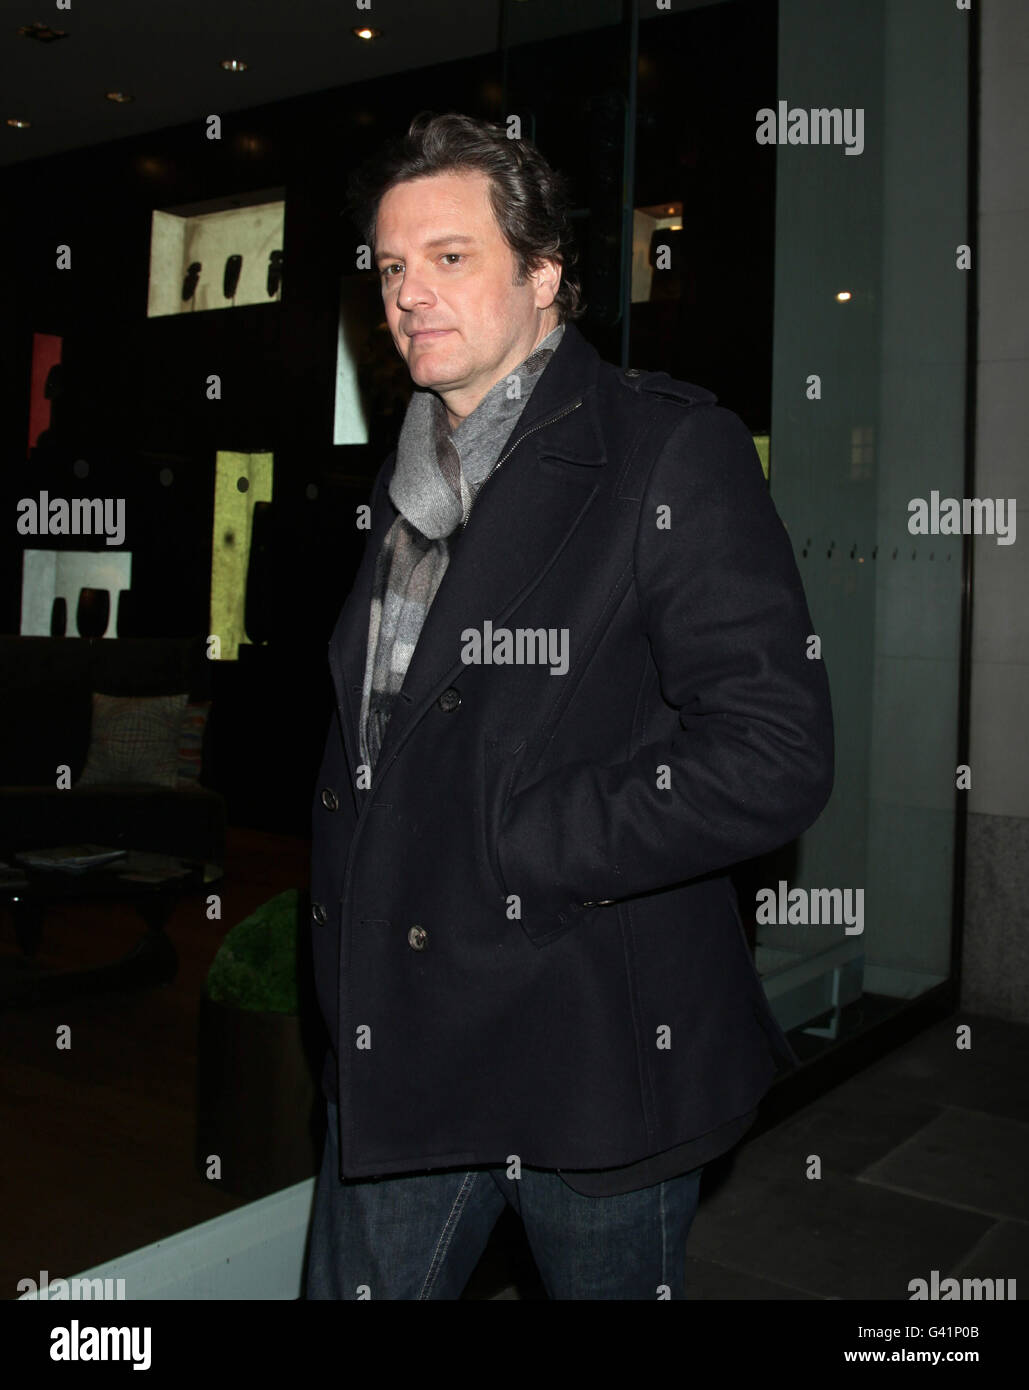 Actor Colin Firth arriving for a 'Meet the Filmmakers: The King's Speech' event at the Apple Store on Regent Street, central London. Stock Photo